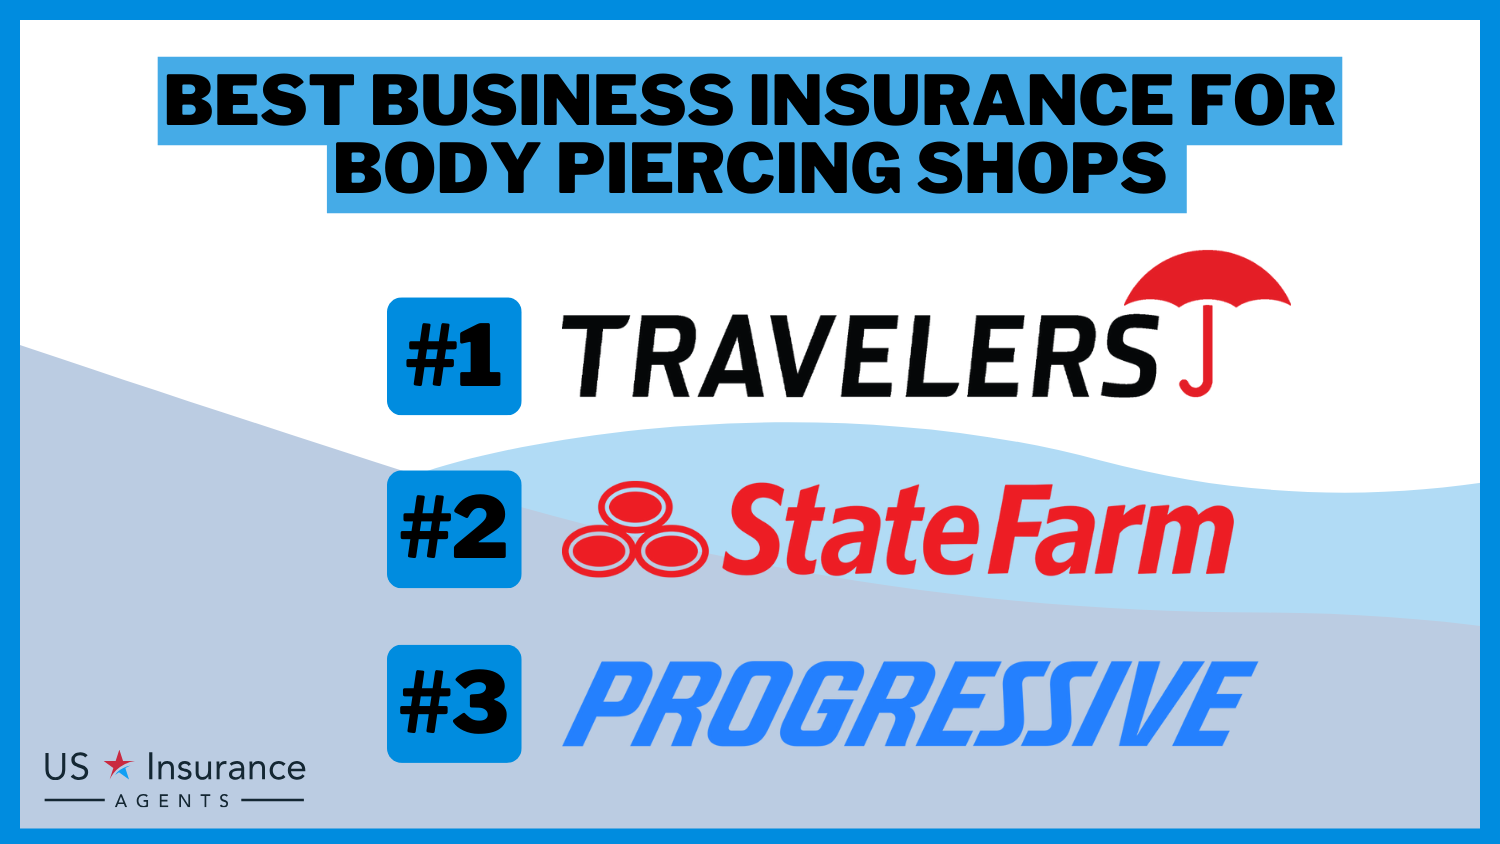 Best Business Insurance for Body Piercing Shops Travelers, State Farm and Progressive.